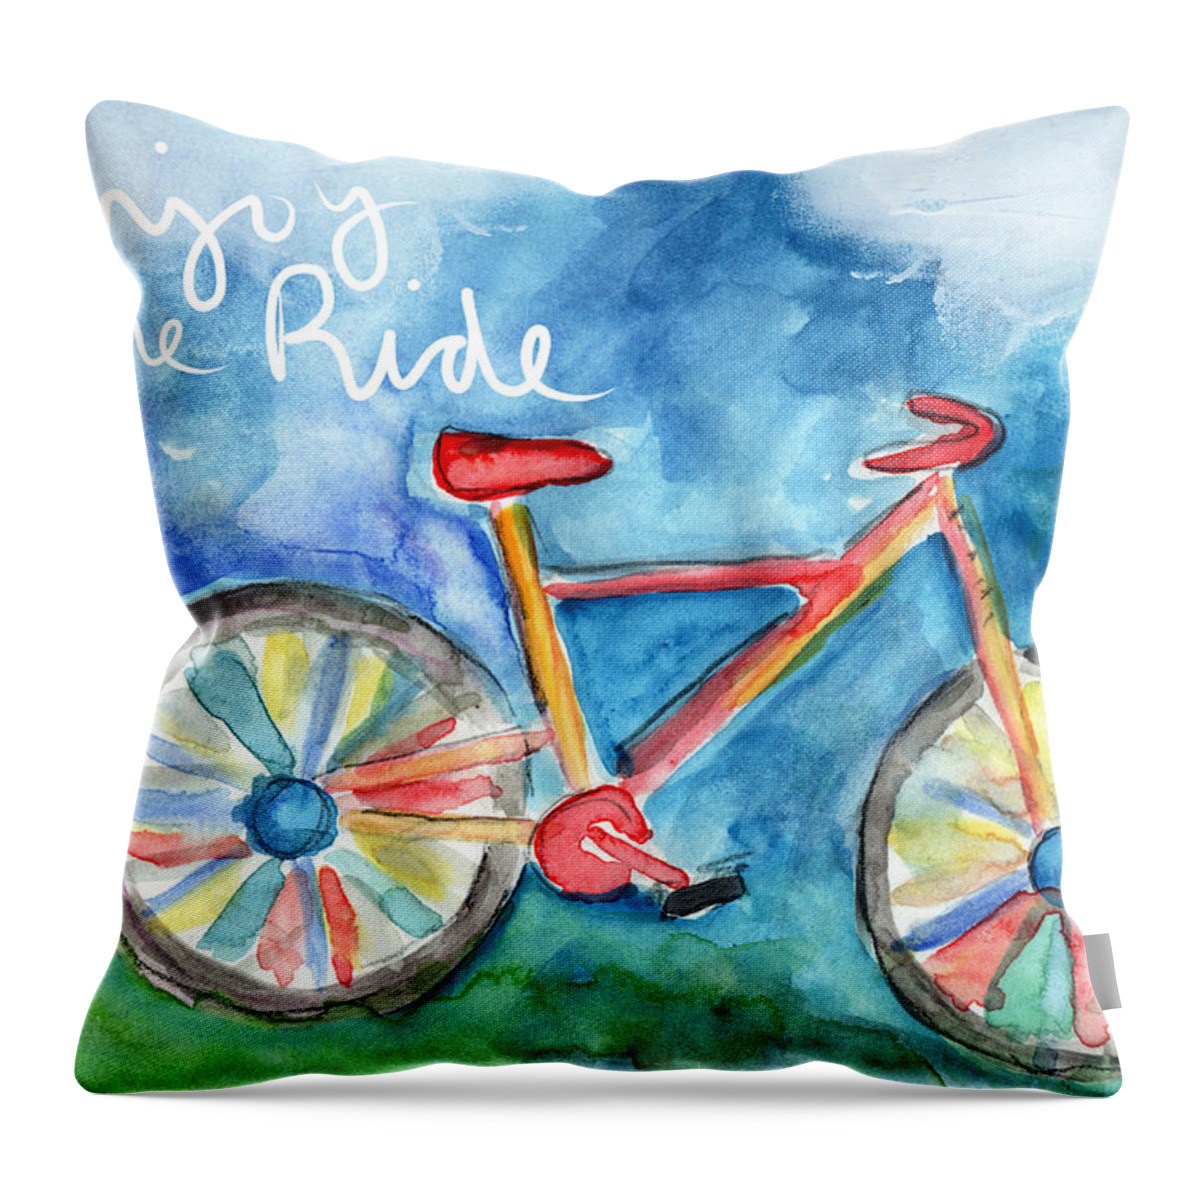 Bike Throw Pillow featuring the painting Enjoy The Ride- Colorful Bike Painting by Linda Woods